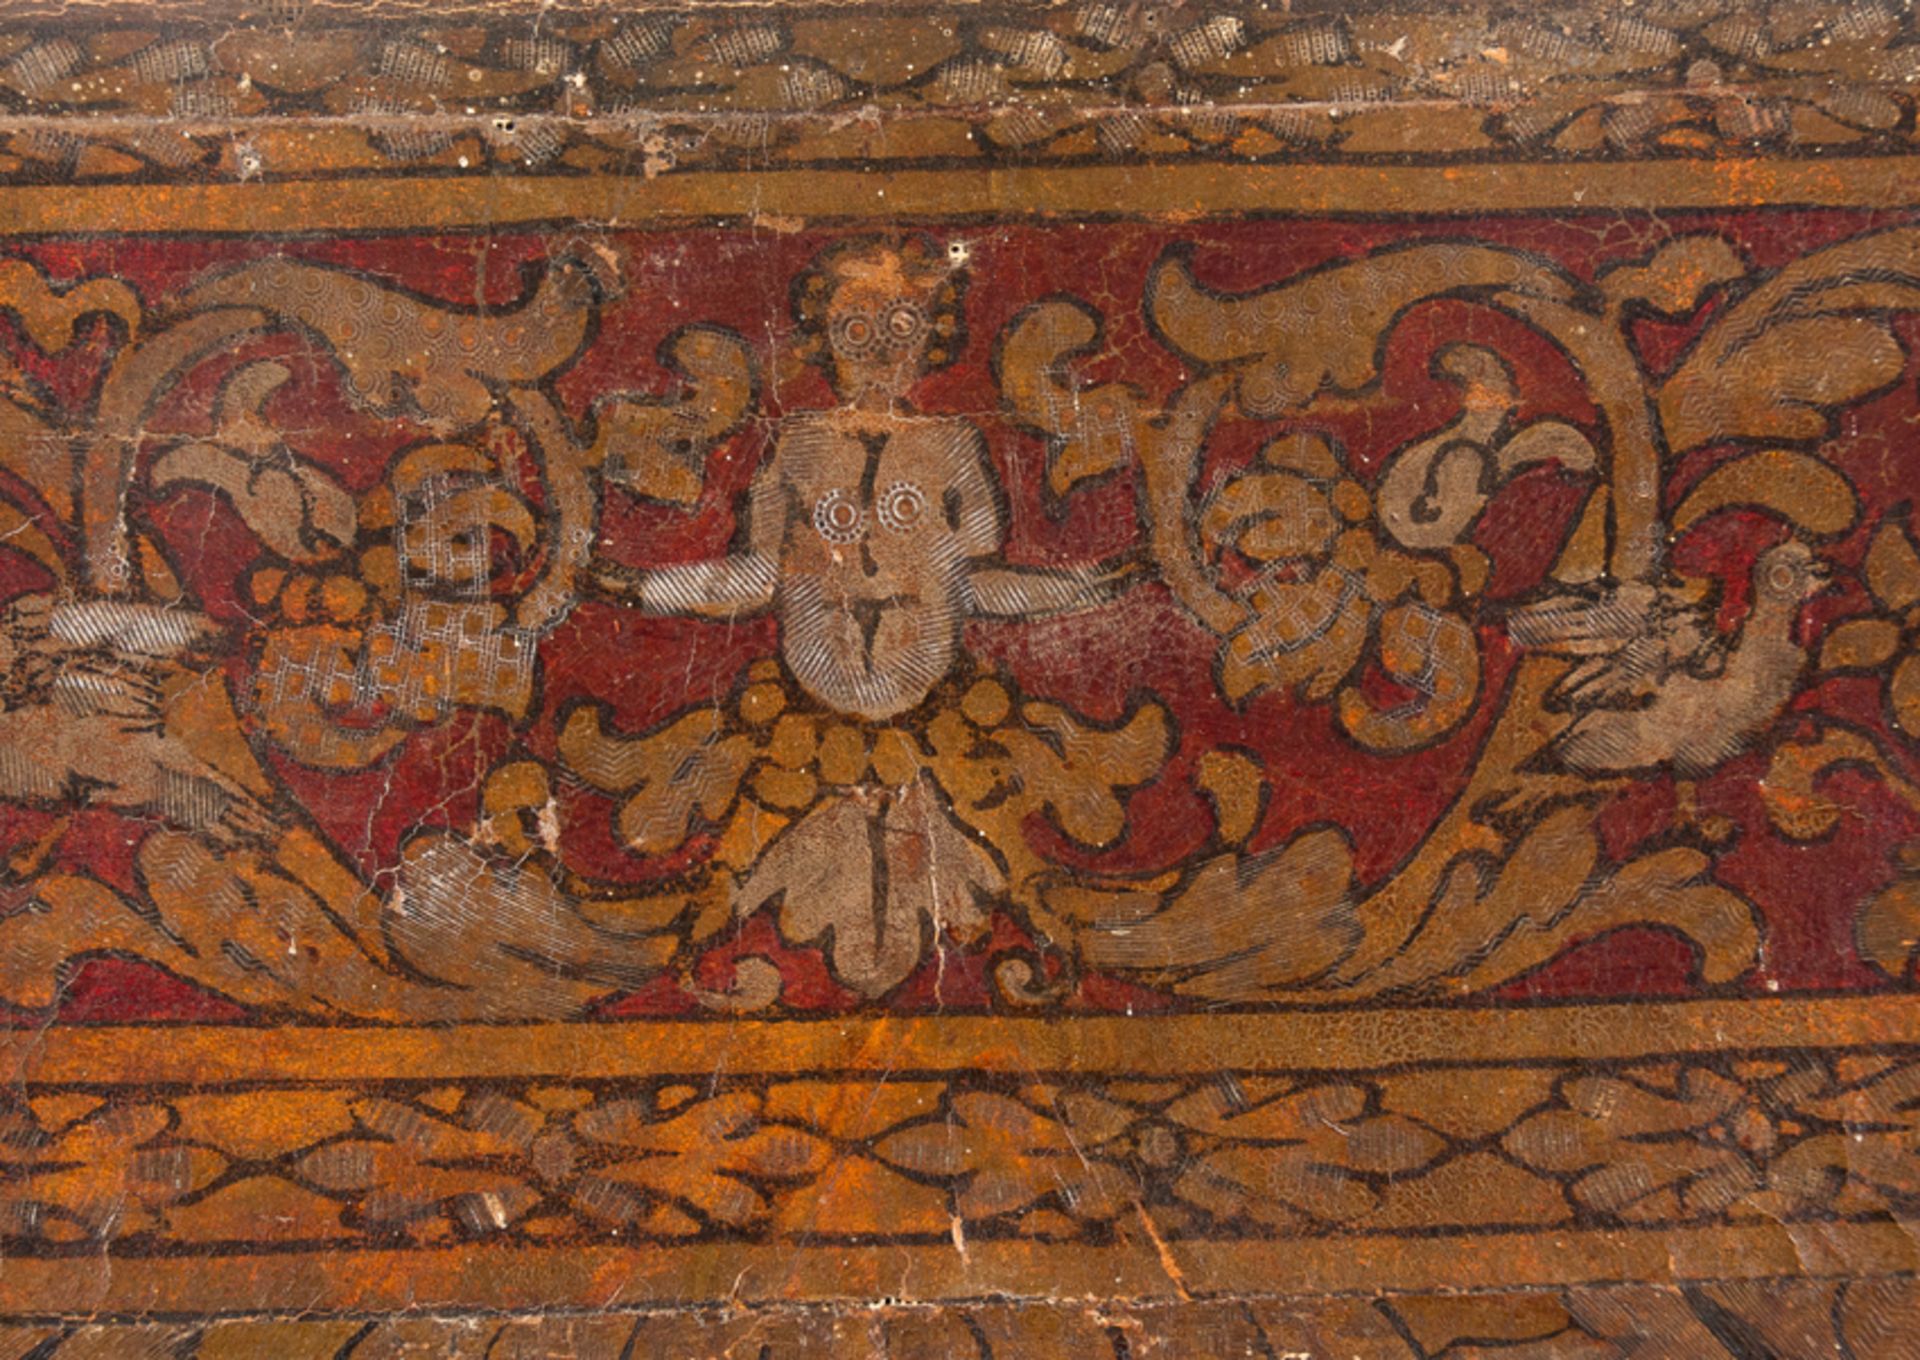 Embossed, engraved, polychromed and gilded cordovan leather. Possibly Flemish. 18th century. - Image 9 of 14